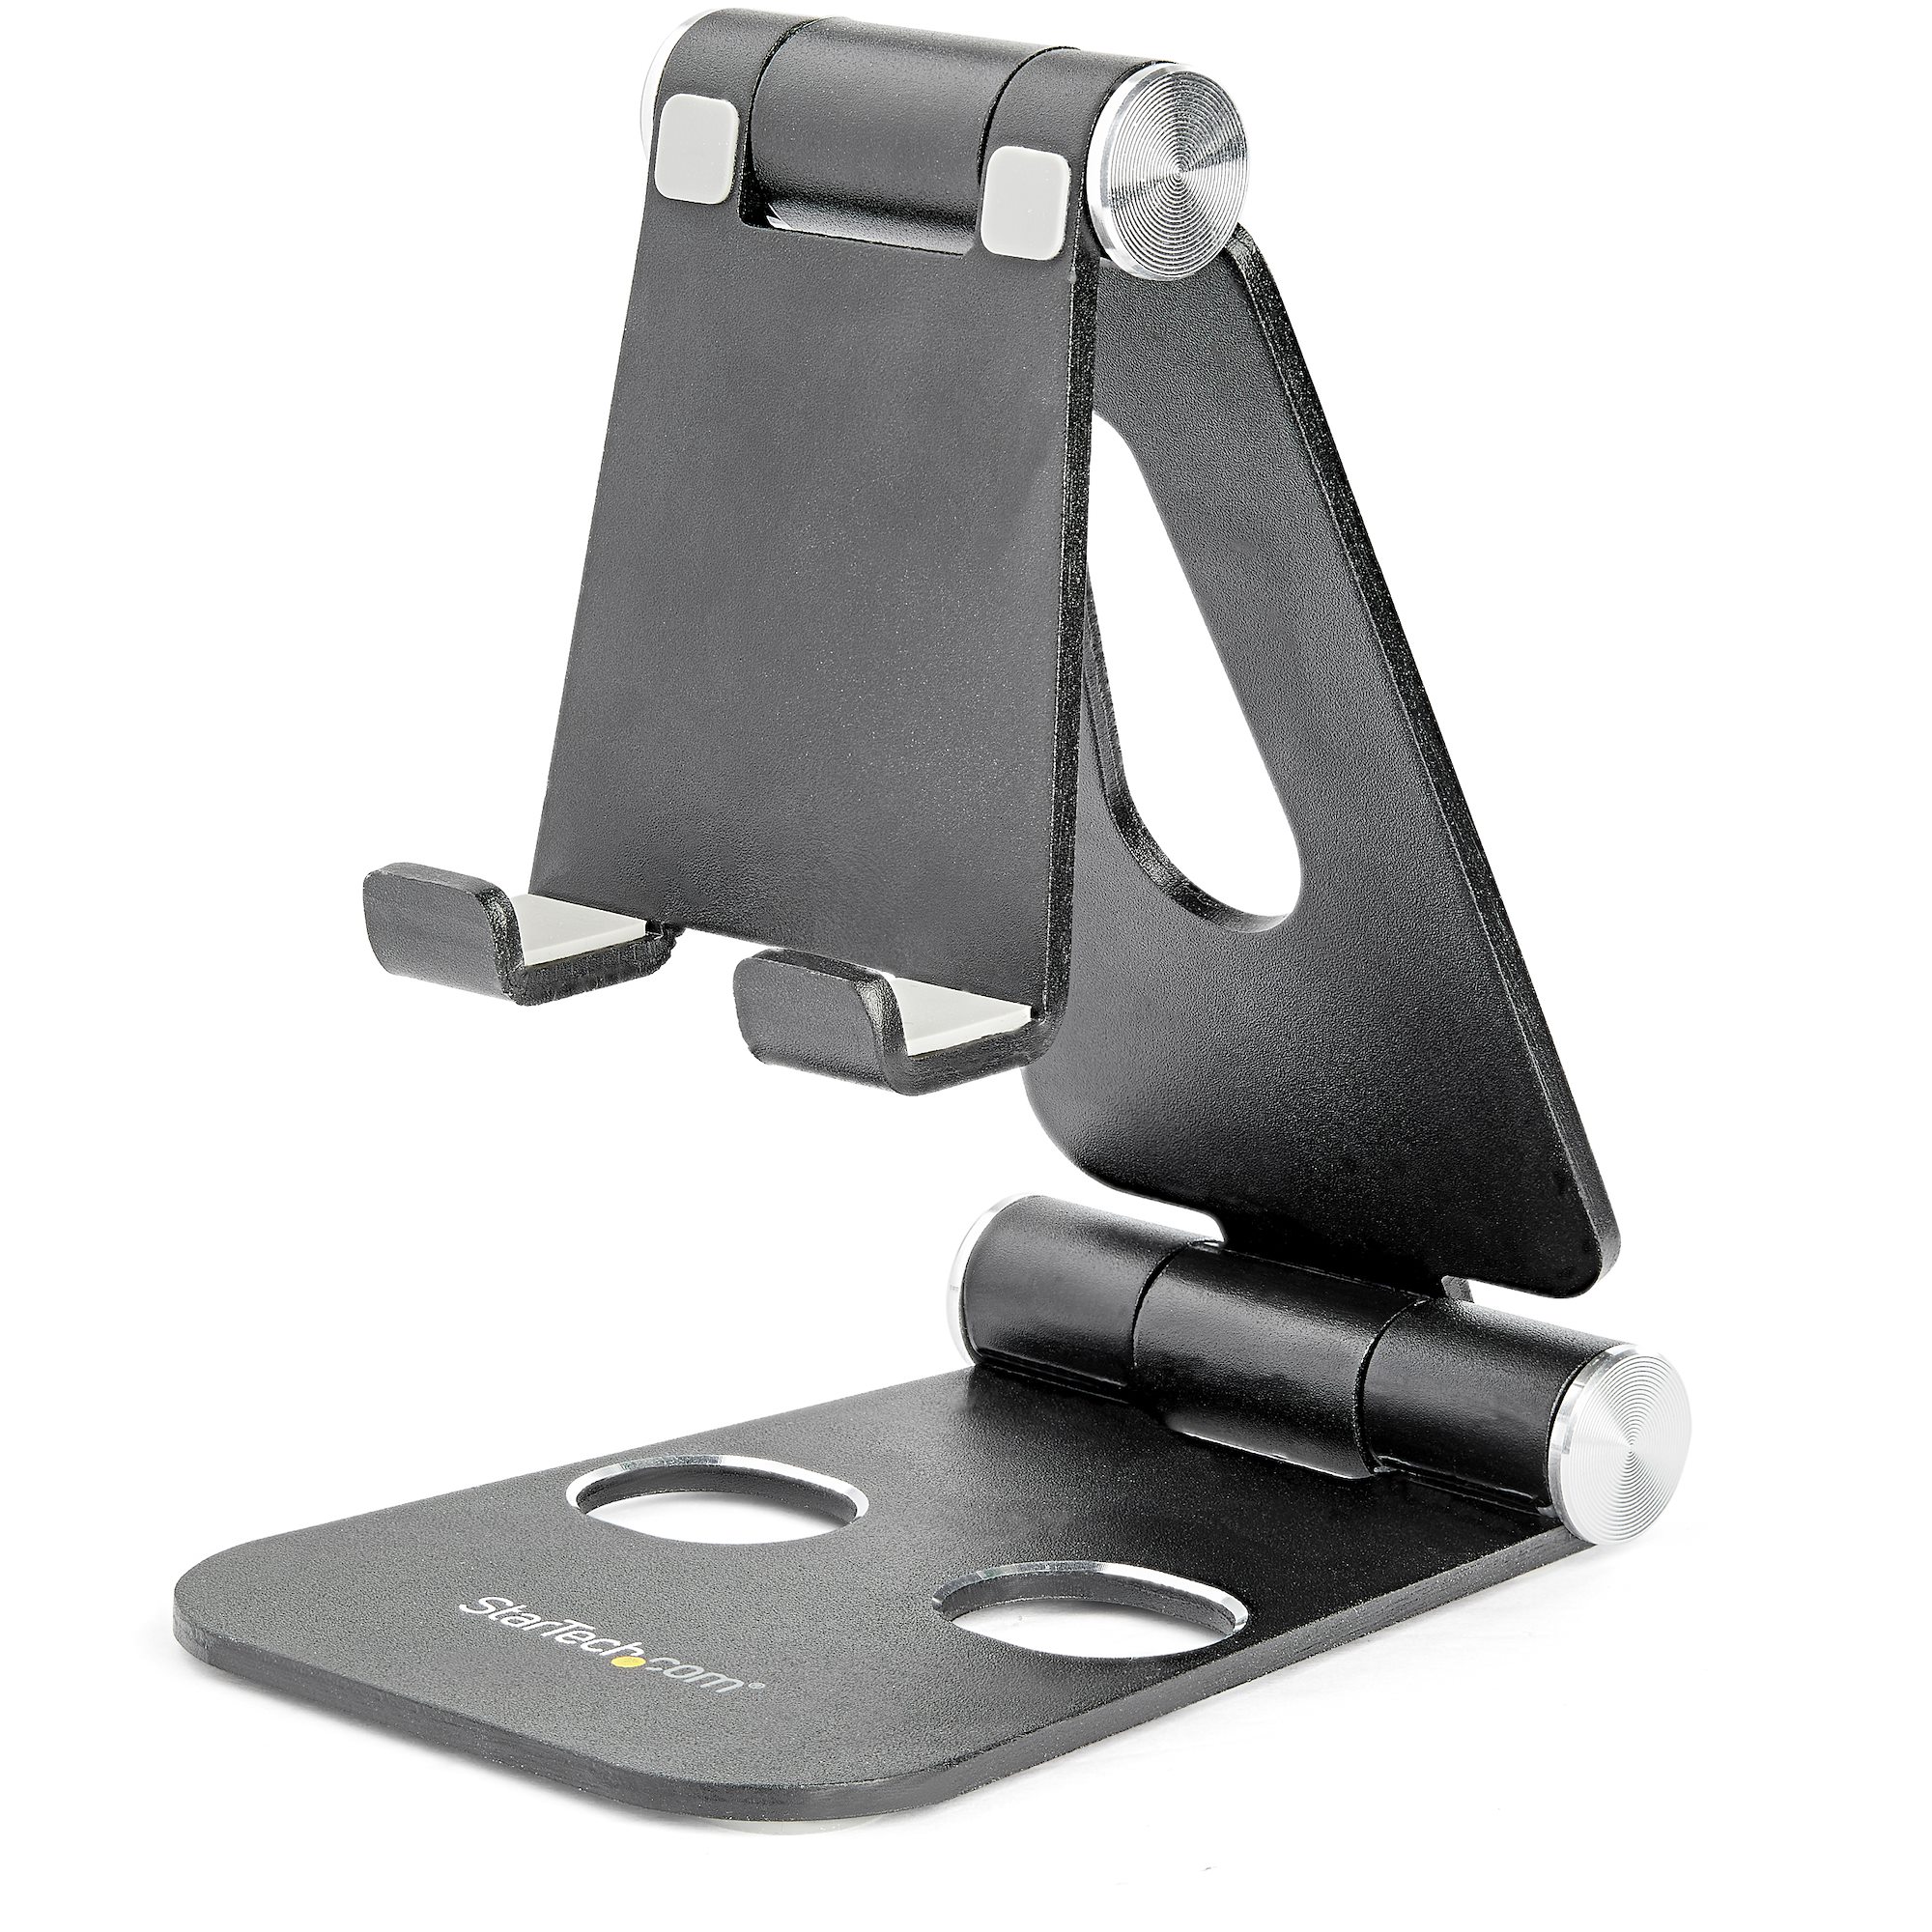 Mobile Phone Stand And Stand Holder Dock For iPad Tablet For Cell Phones 